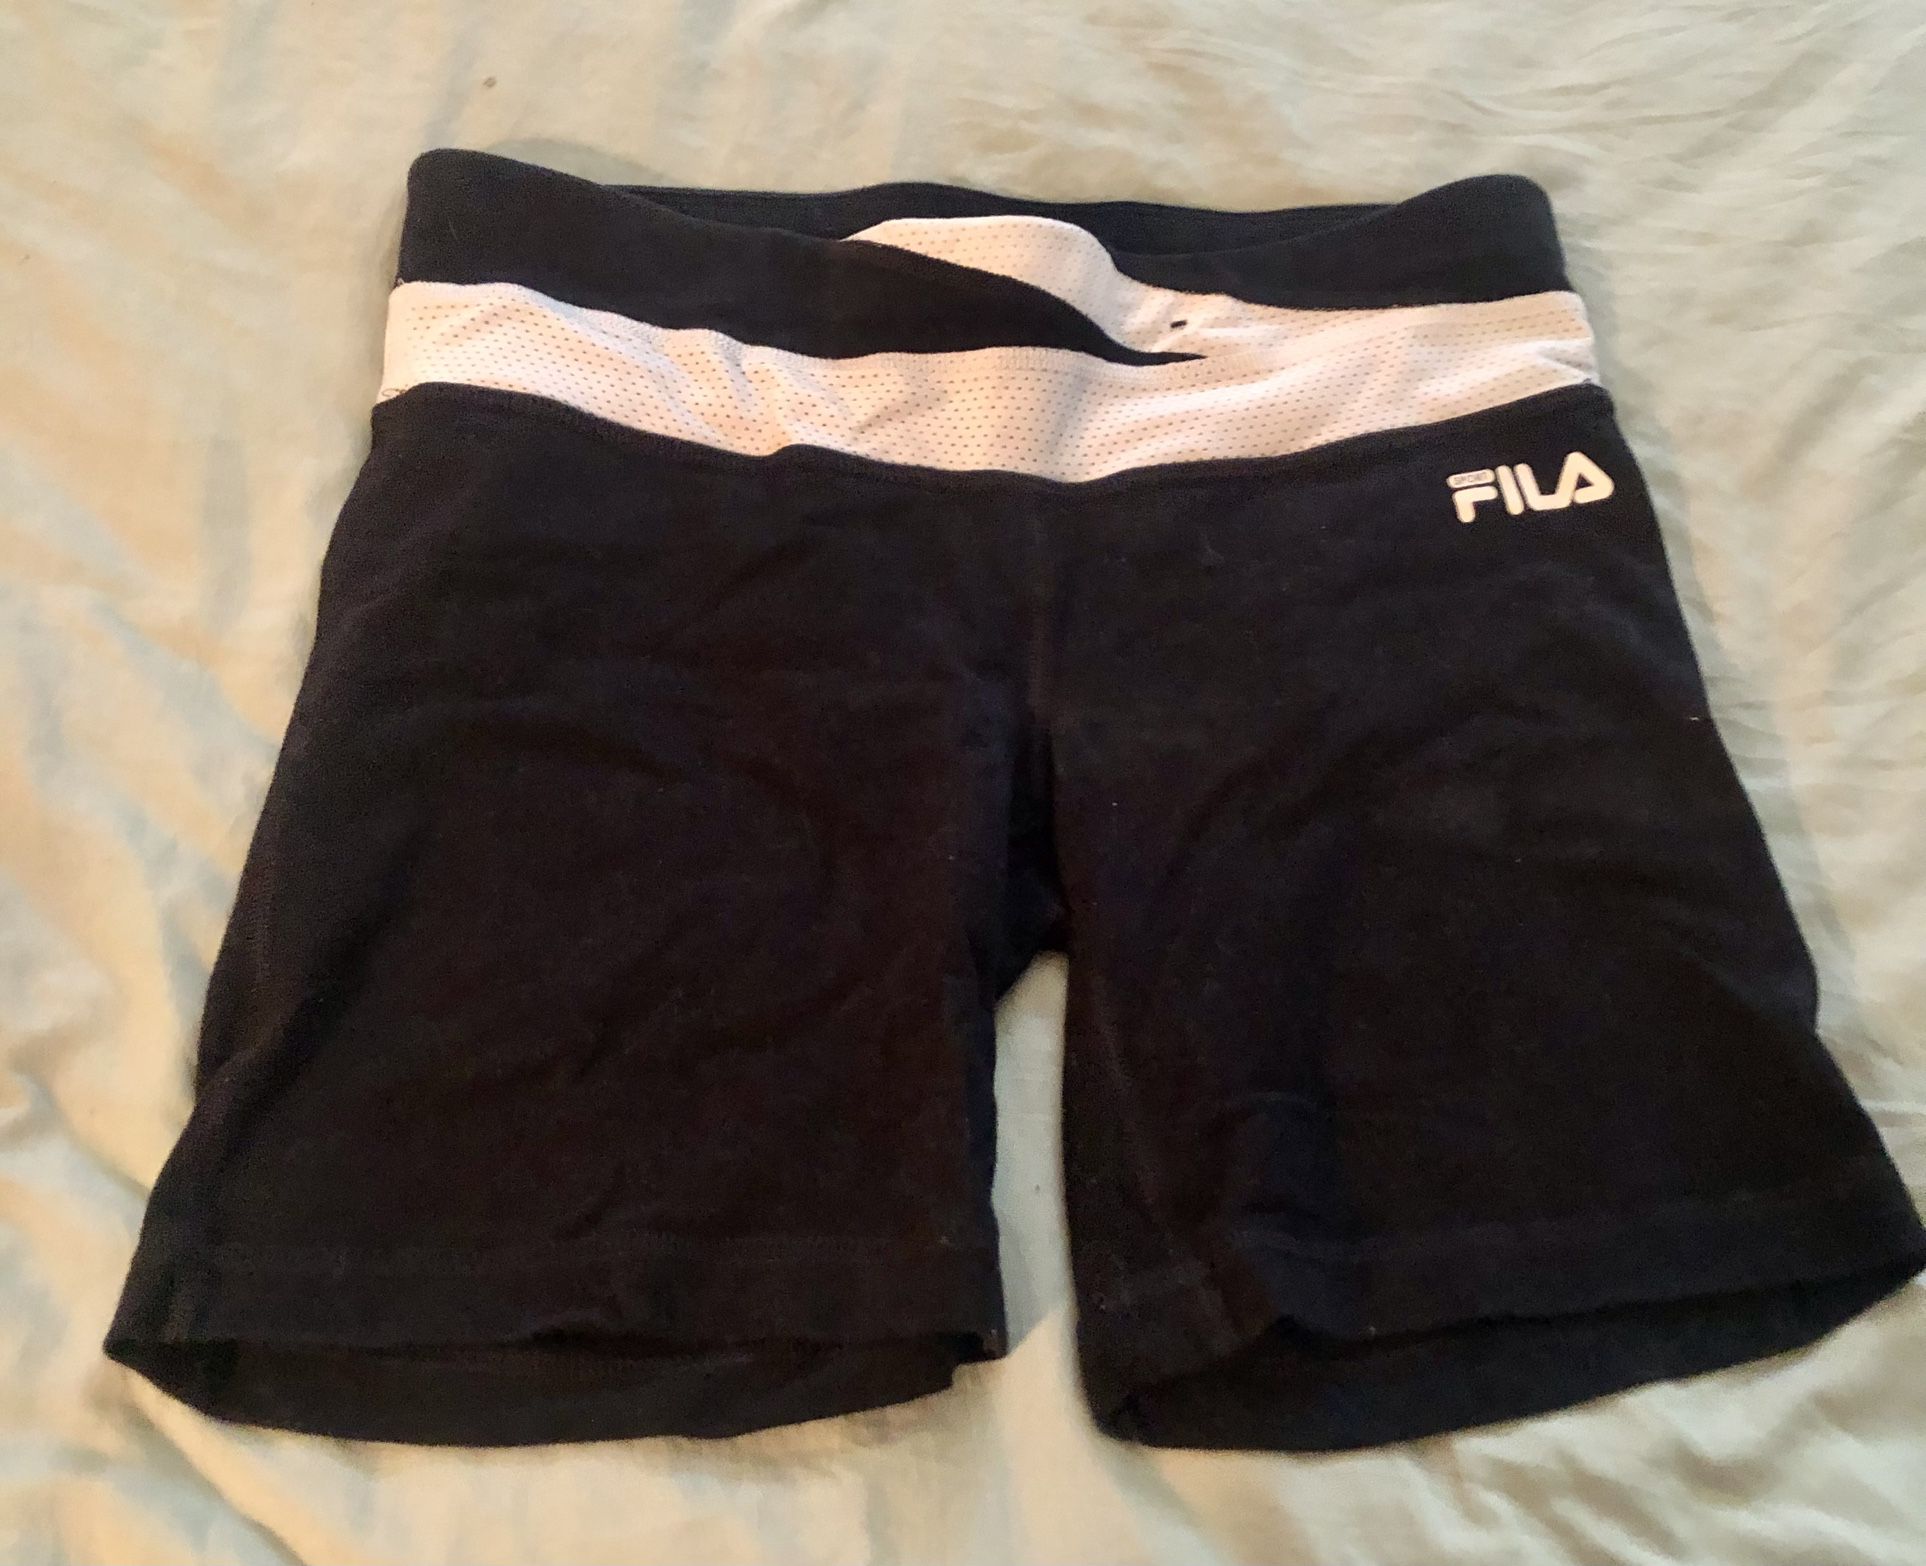 patrice Anzai klarhed Fila Running Shorts Size Small for Sale in San Marcos, CA - OfferUp